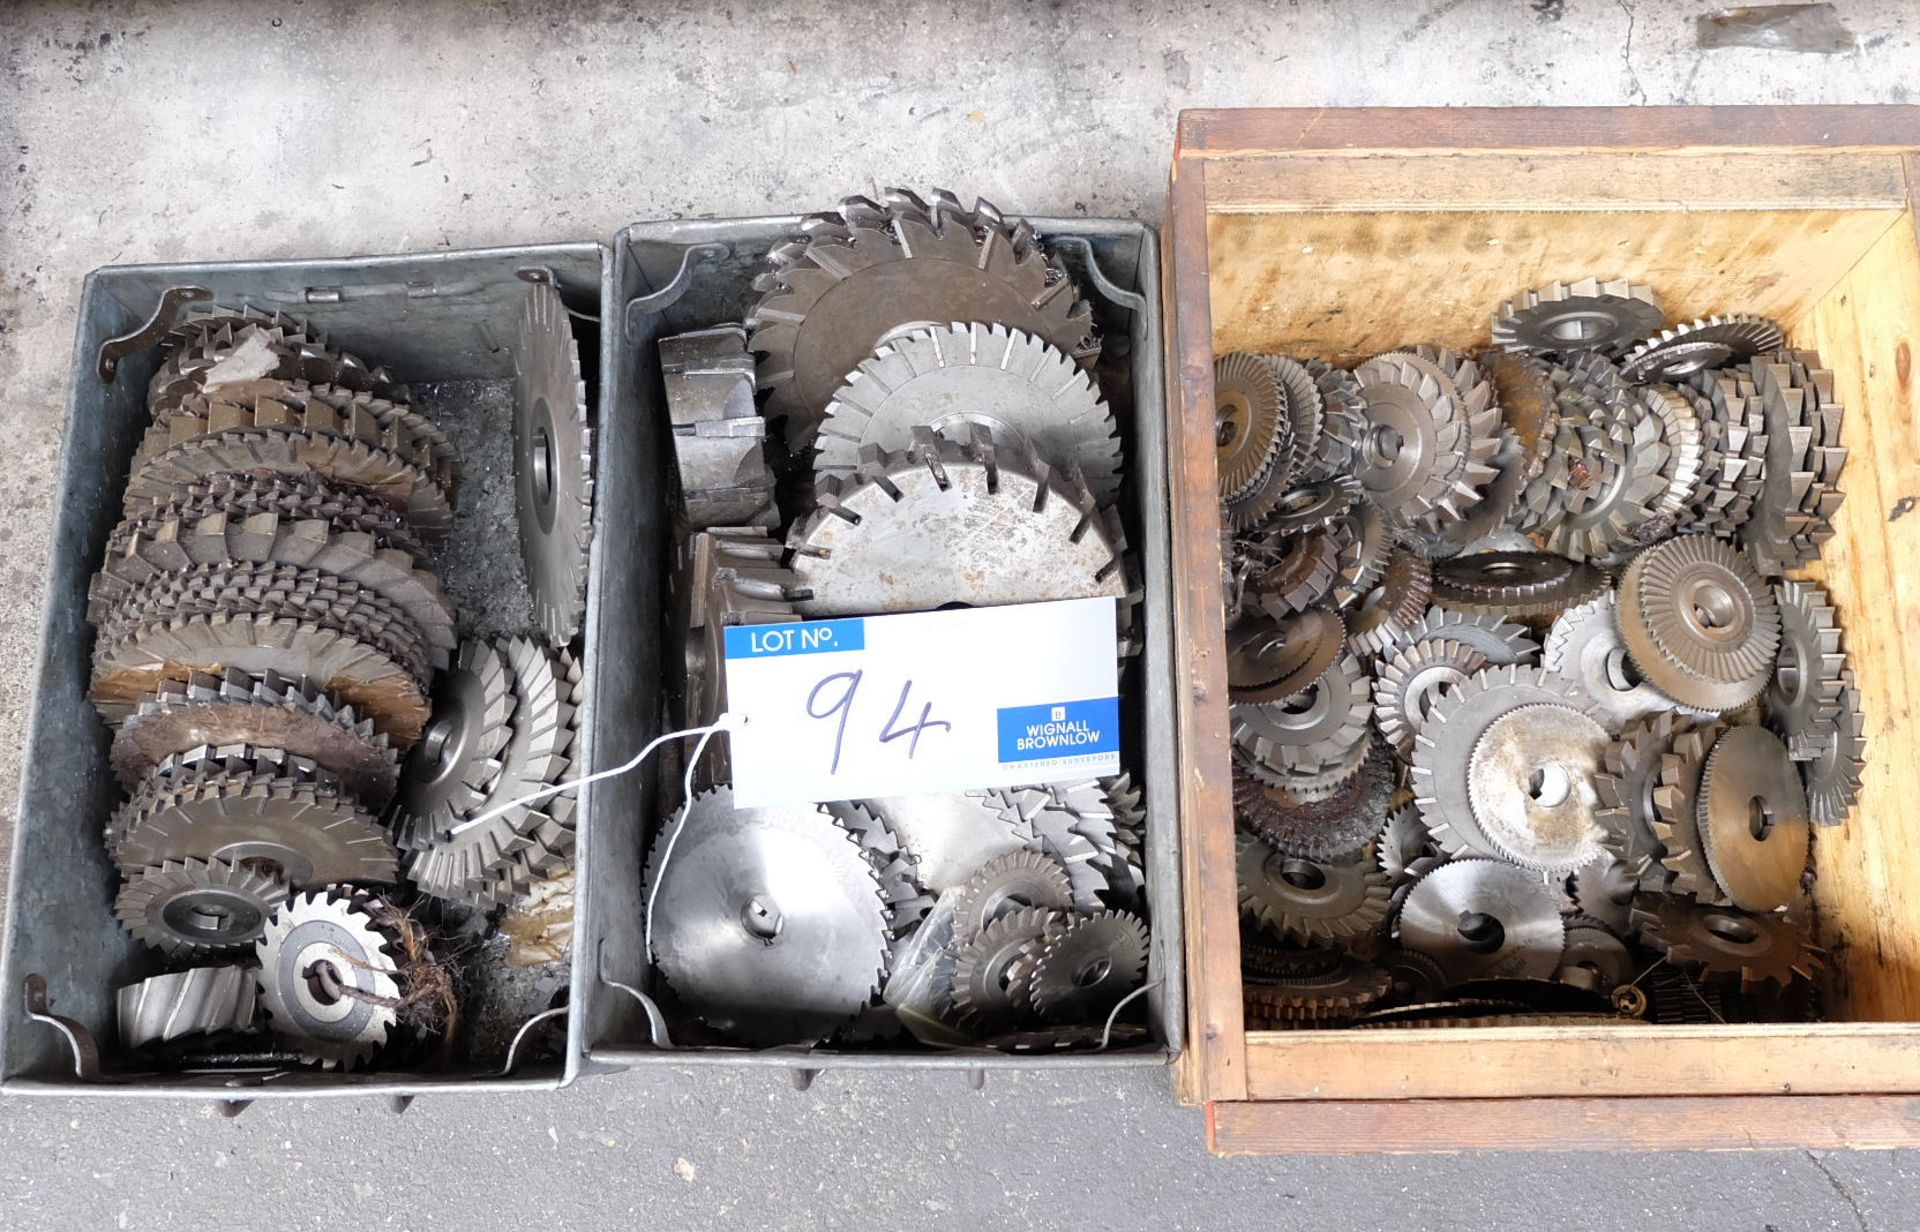 Assorted Slitting Saws and Milling Cutters in 3 boxes.